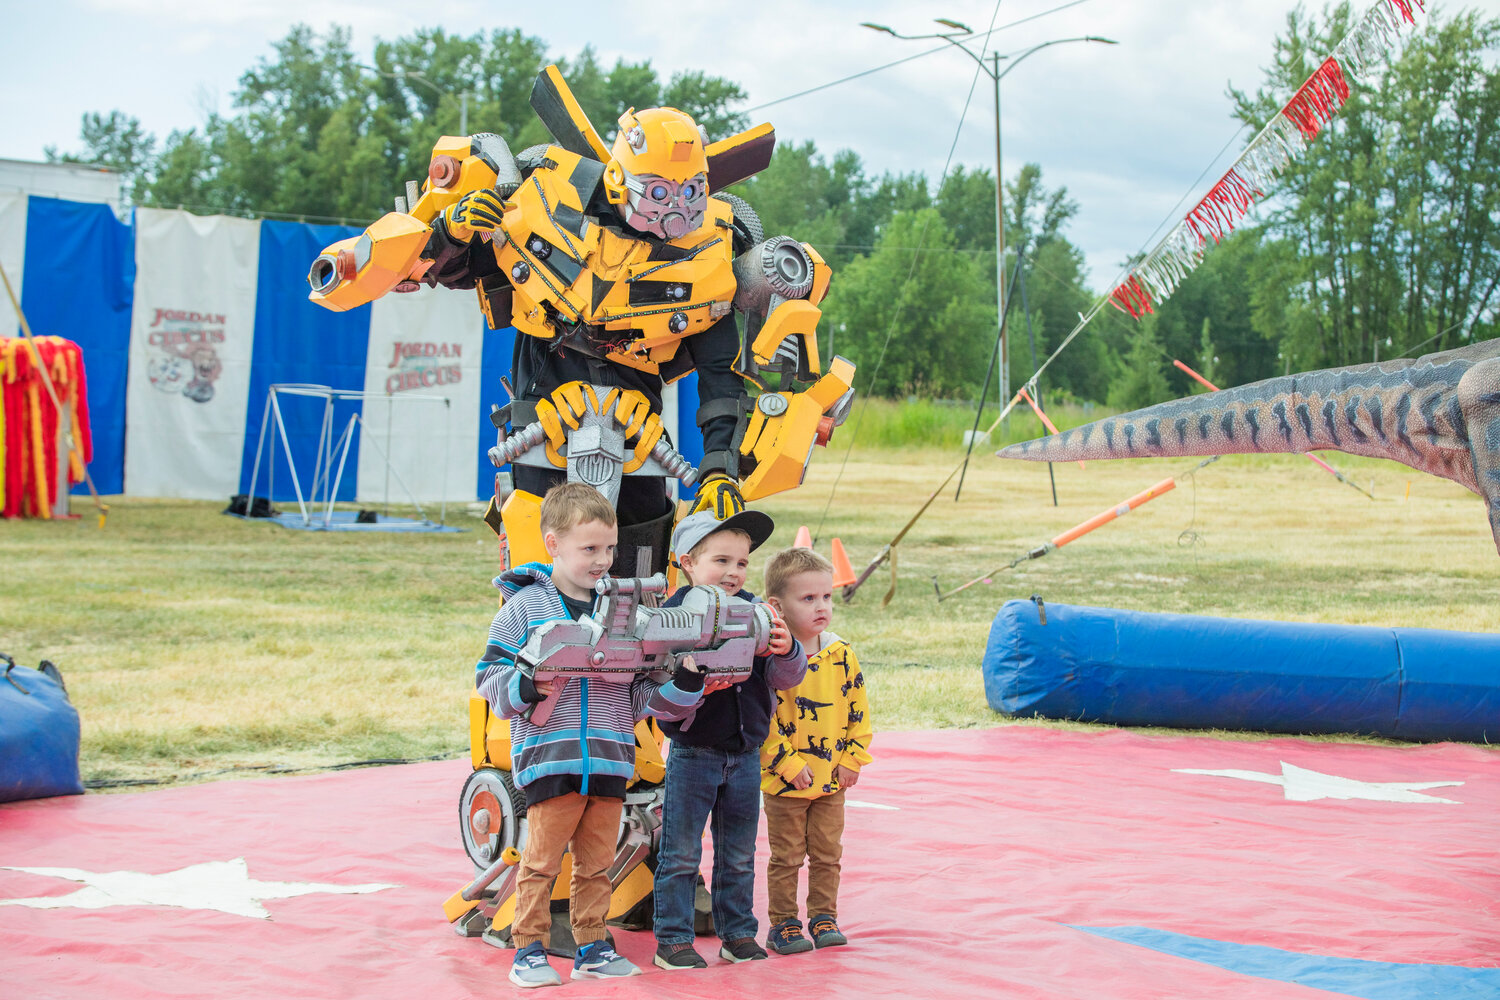 From left, Centralia kids Colton, 5, Kohen, 5, and Emerson, 3, pose for a photo with Bumblebee, the Transformer, at the Southwest Washington Fairgrounds during the Jordan World Circus show on Wednesday, May 31.